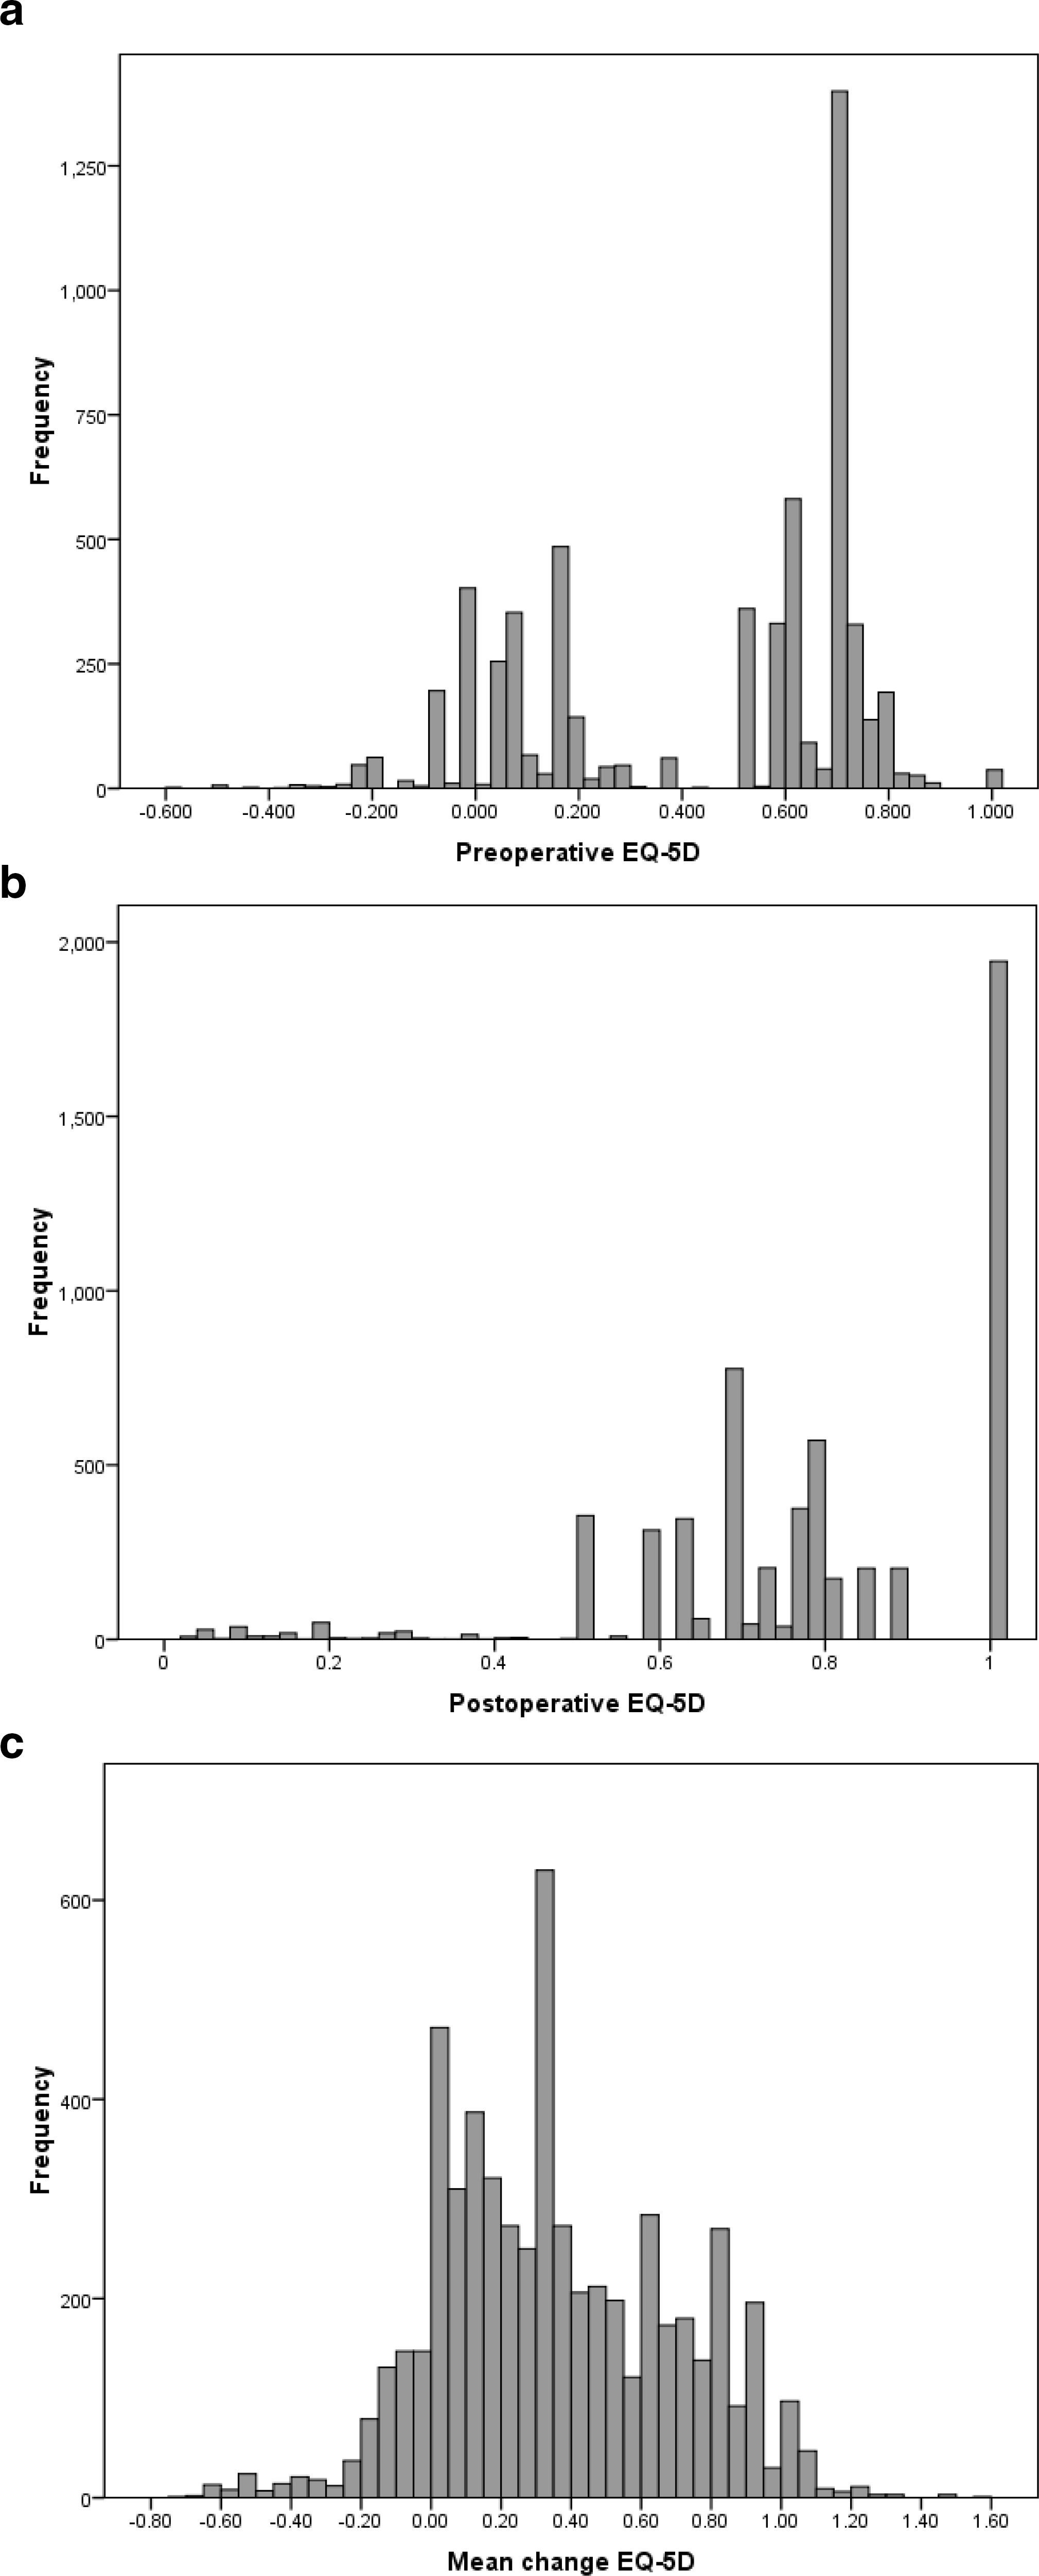 Fig. 2 
            Histograms illustrating the distribution of the a) preoperative, b) postoperative, and c) change in the EuroQol five-dimension health questionnaire (EQ-5D) after total knee arthroplasty.
          